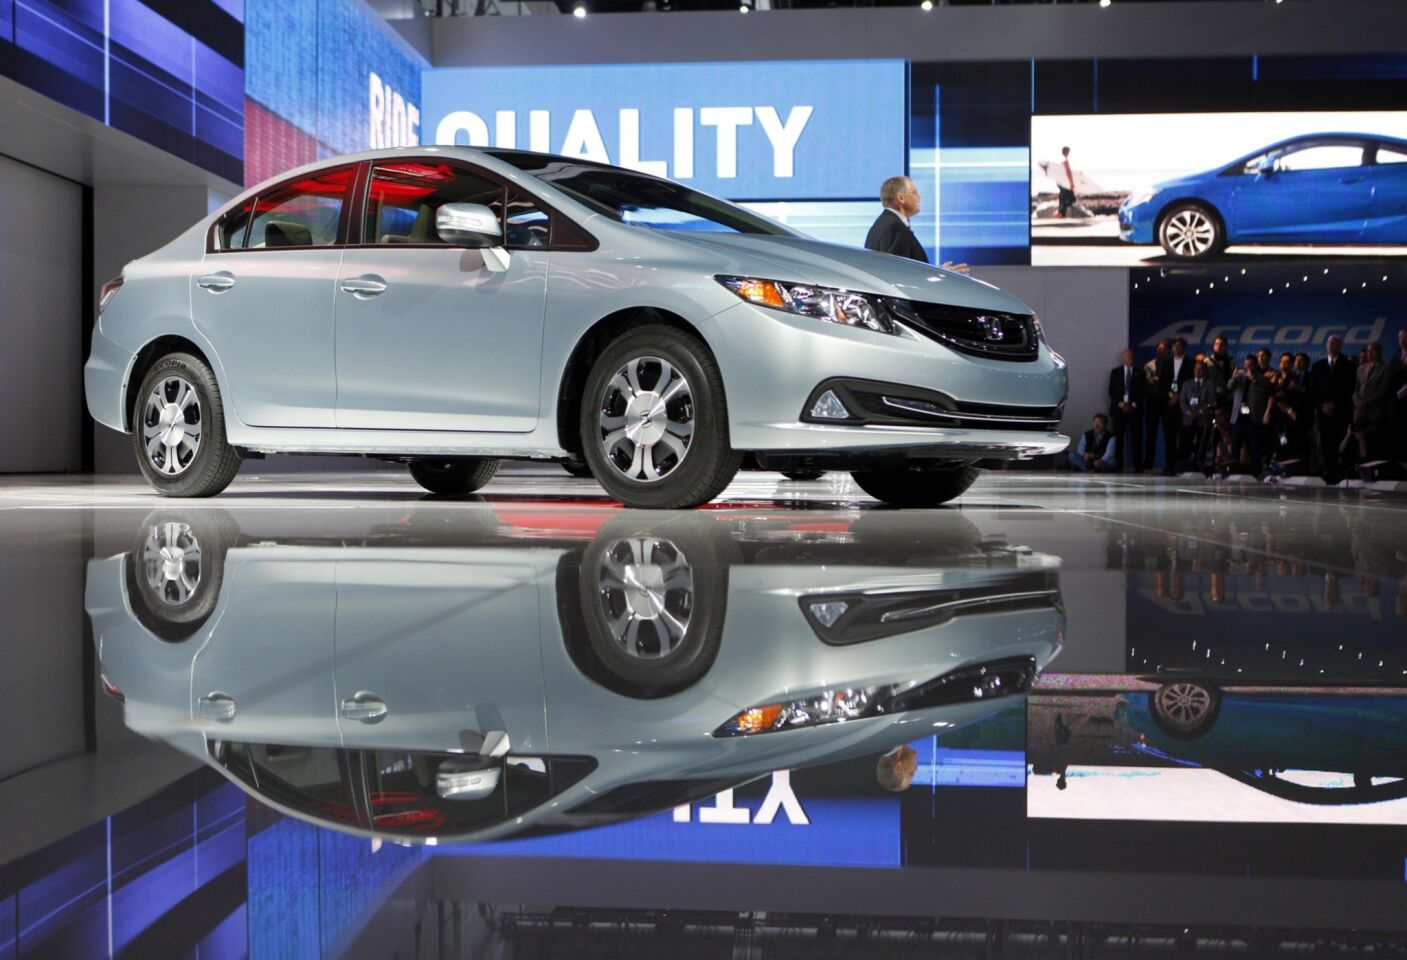 The 2013 Honda Civic is introduced at the L.A. Auto Show.